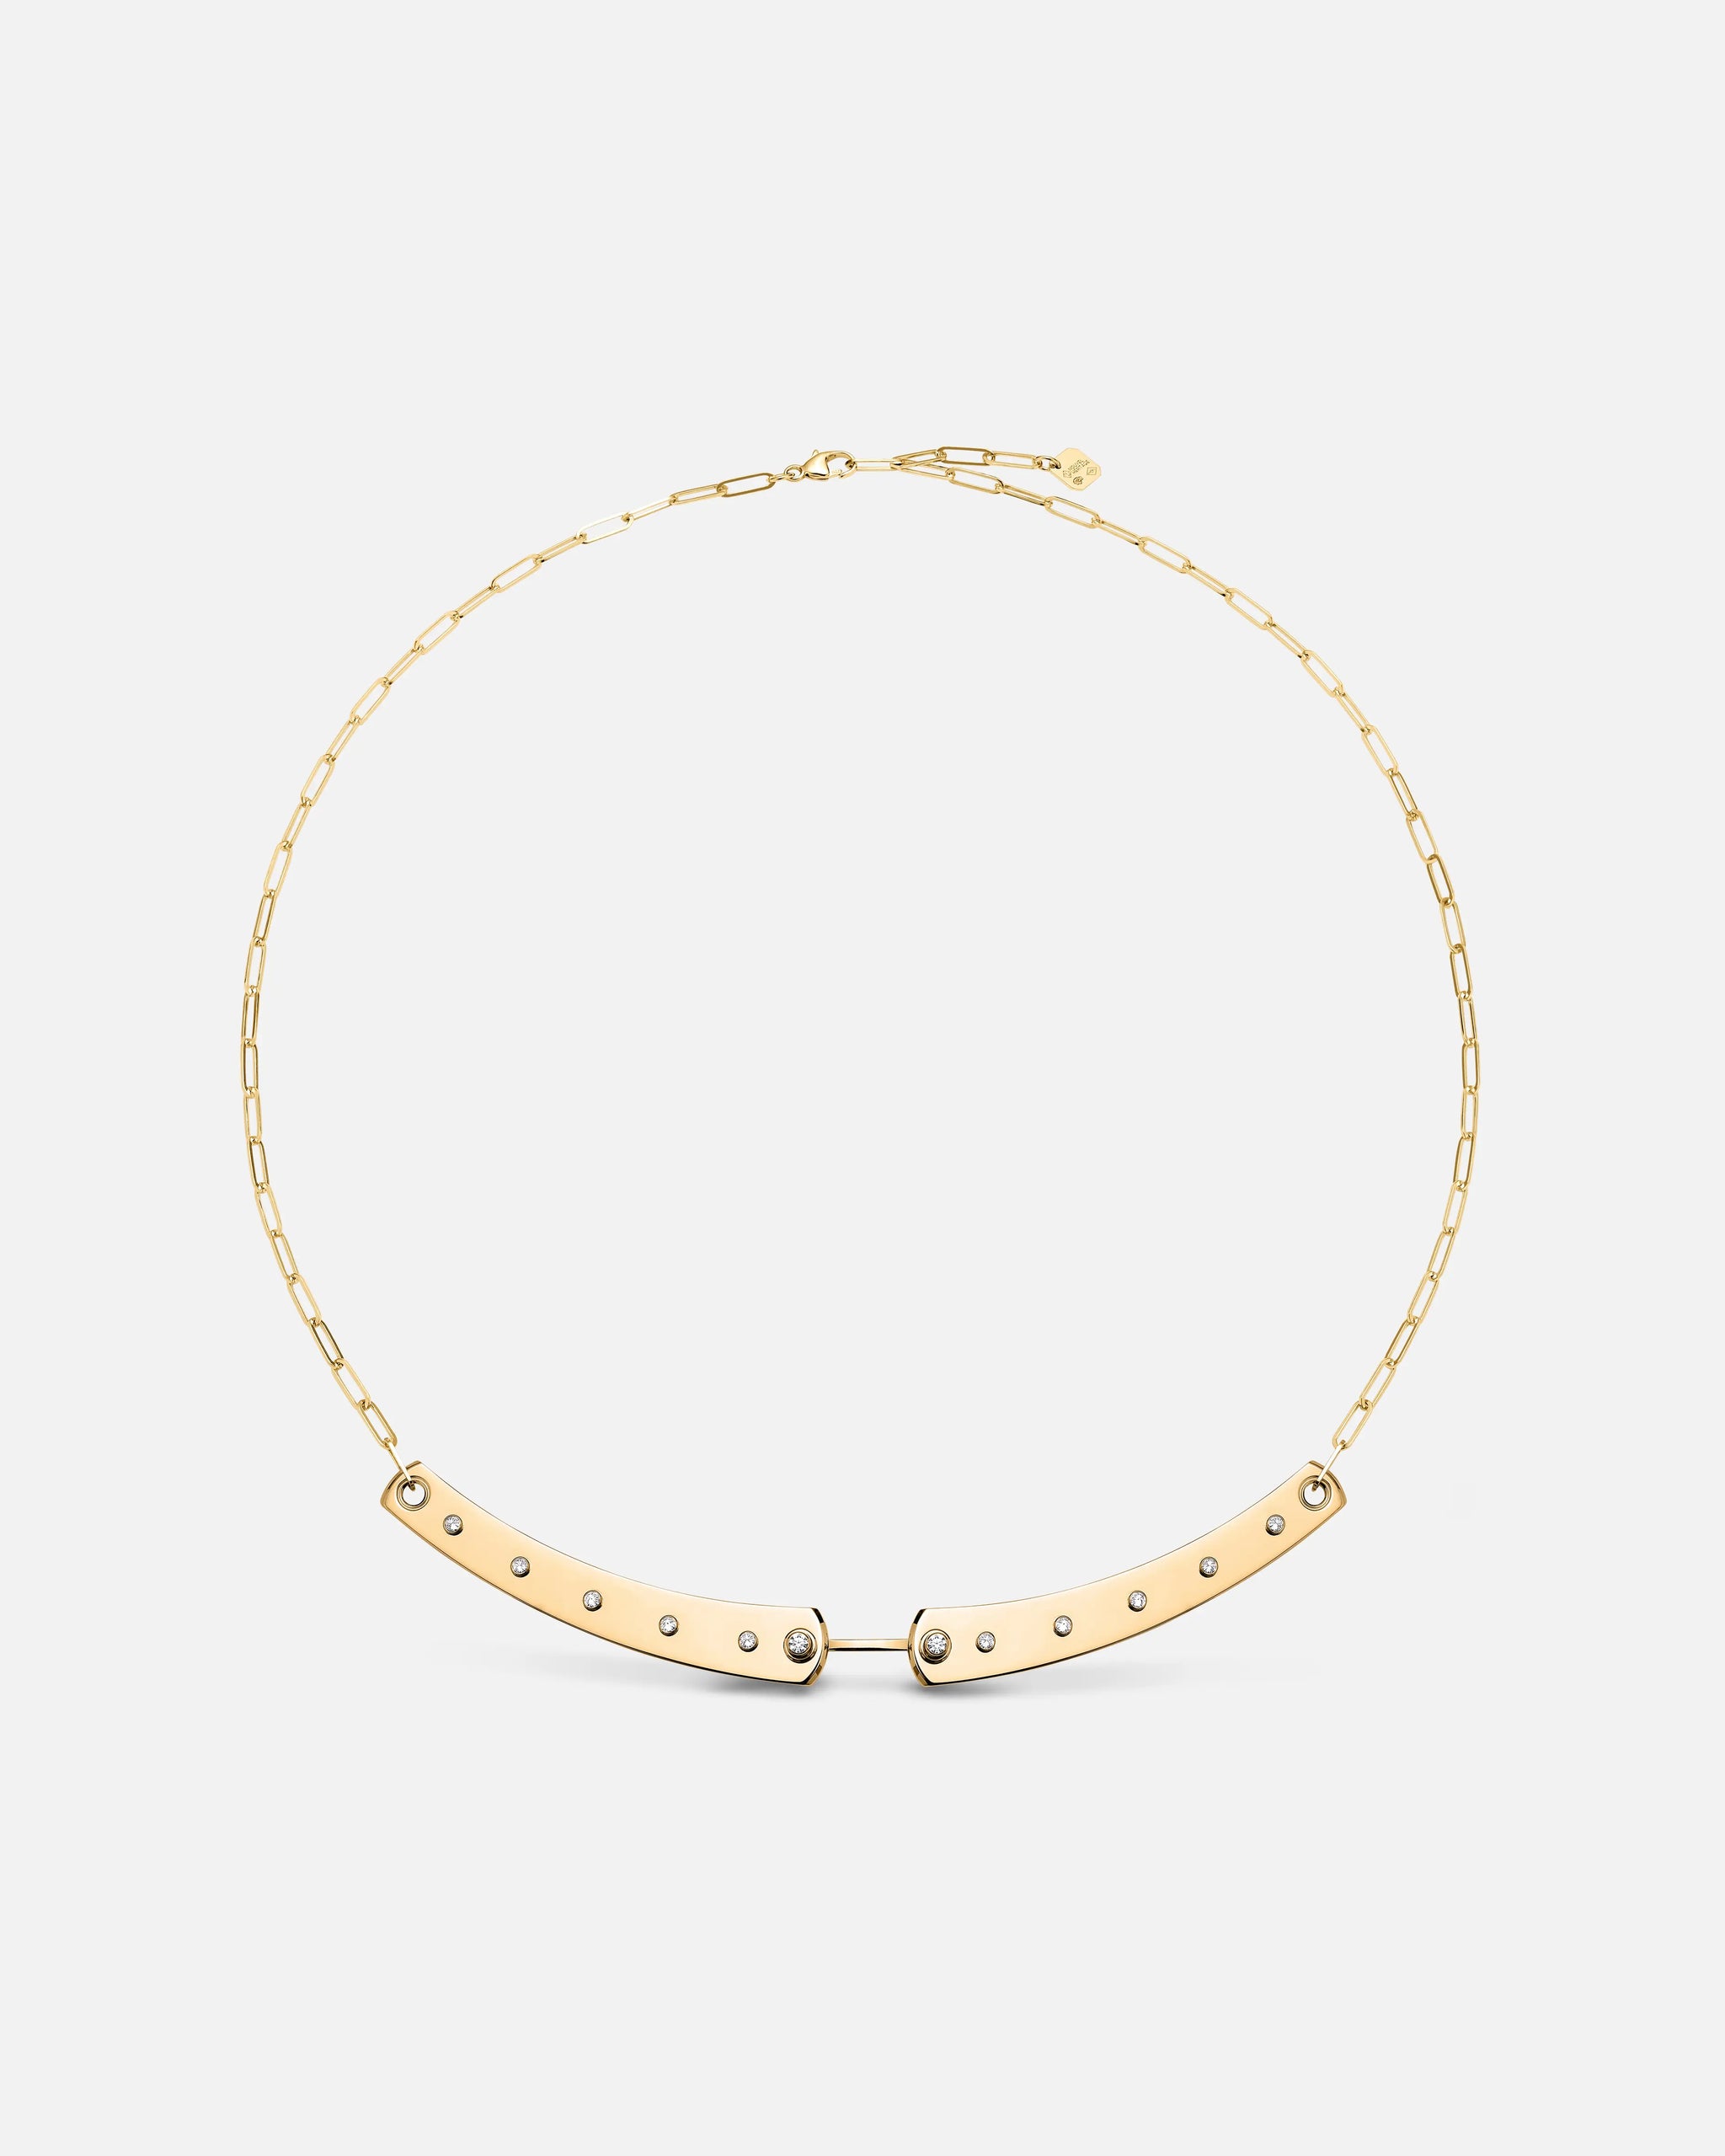 Brunch in NY Mood Necklace in Yellow Gold - 1 - Nouvel Heritage